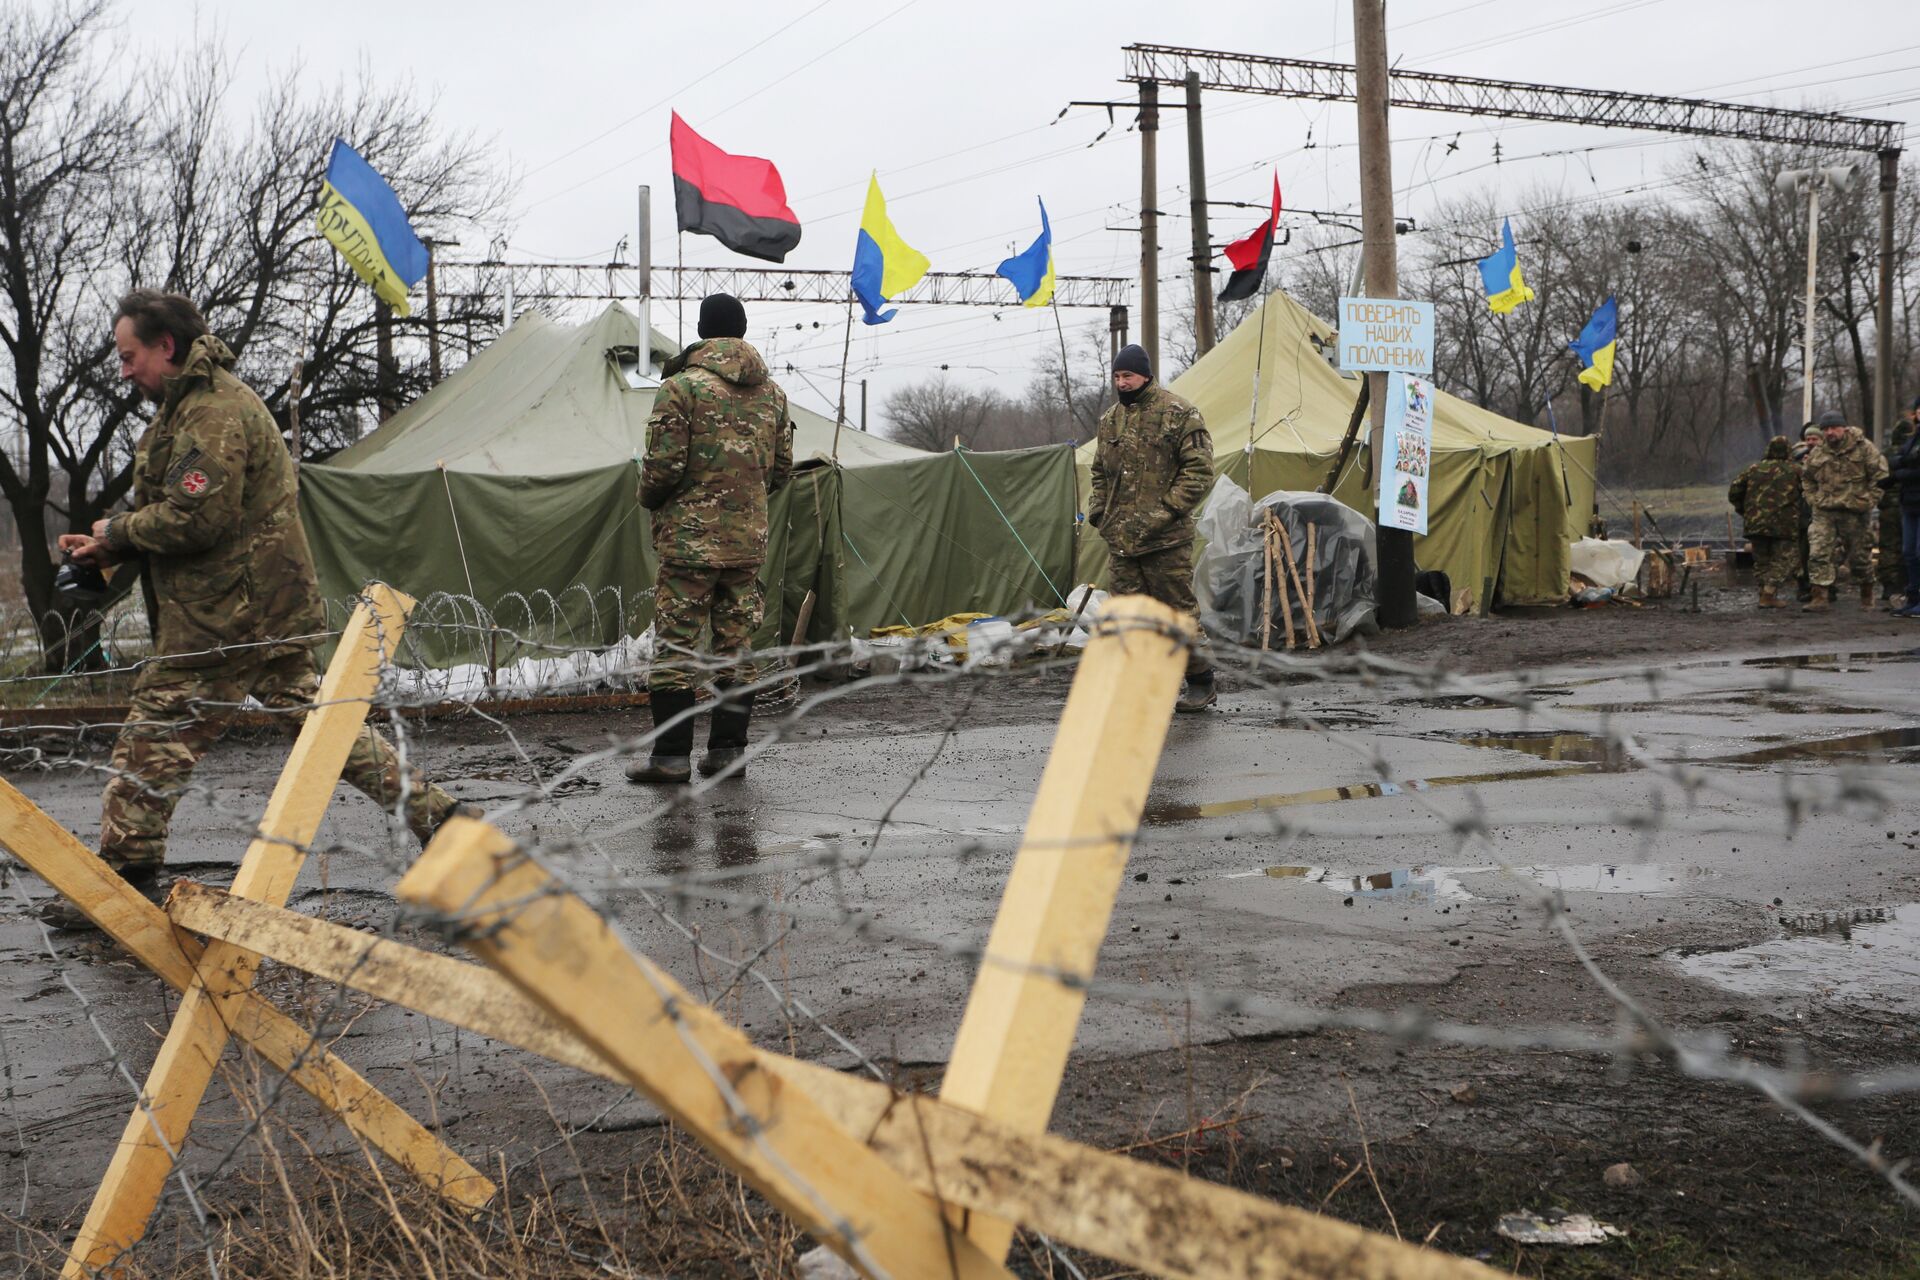 (File) Ukrainian nationalist protesters and military veterans take part in a blockade against ongoing trade with the Donbass self-proclaimed republics, on February 23, 2017, in Kryvyi Torets railway station, Donetsk region - Sputnik International, 1920, 15.02.2022